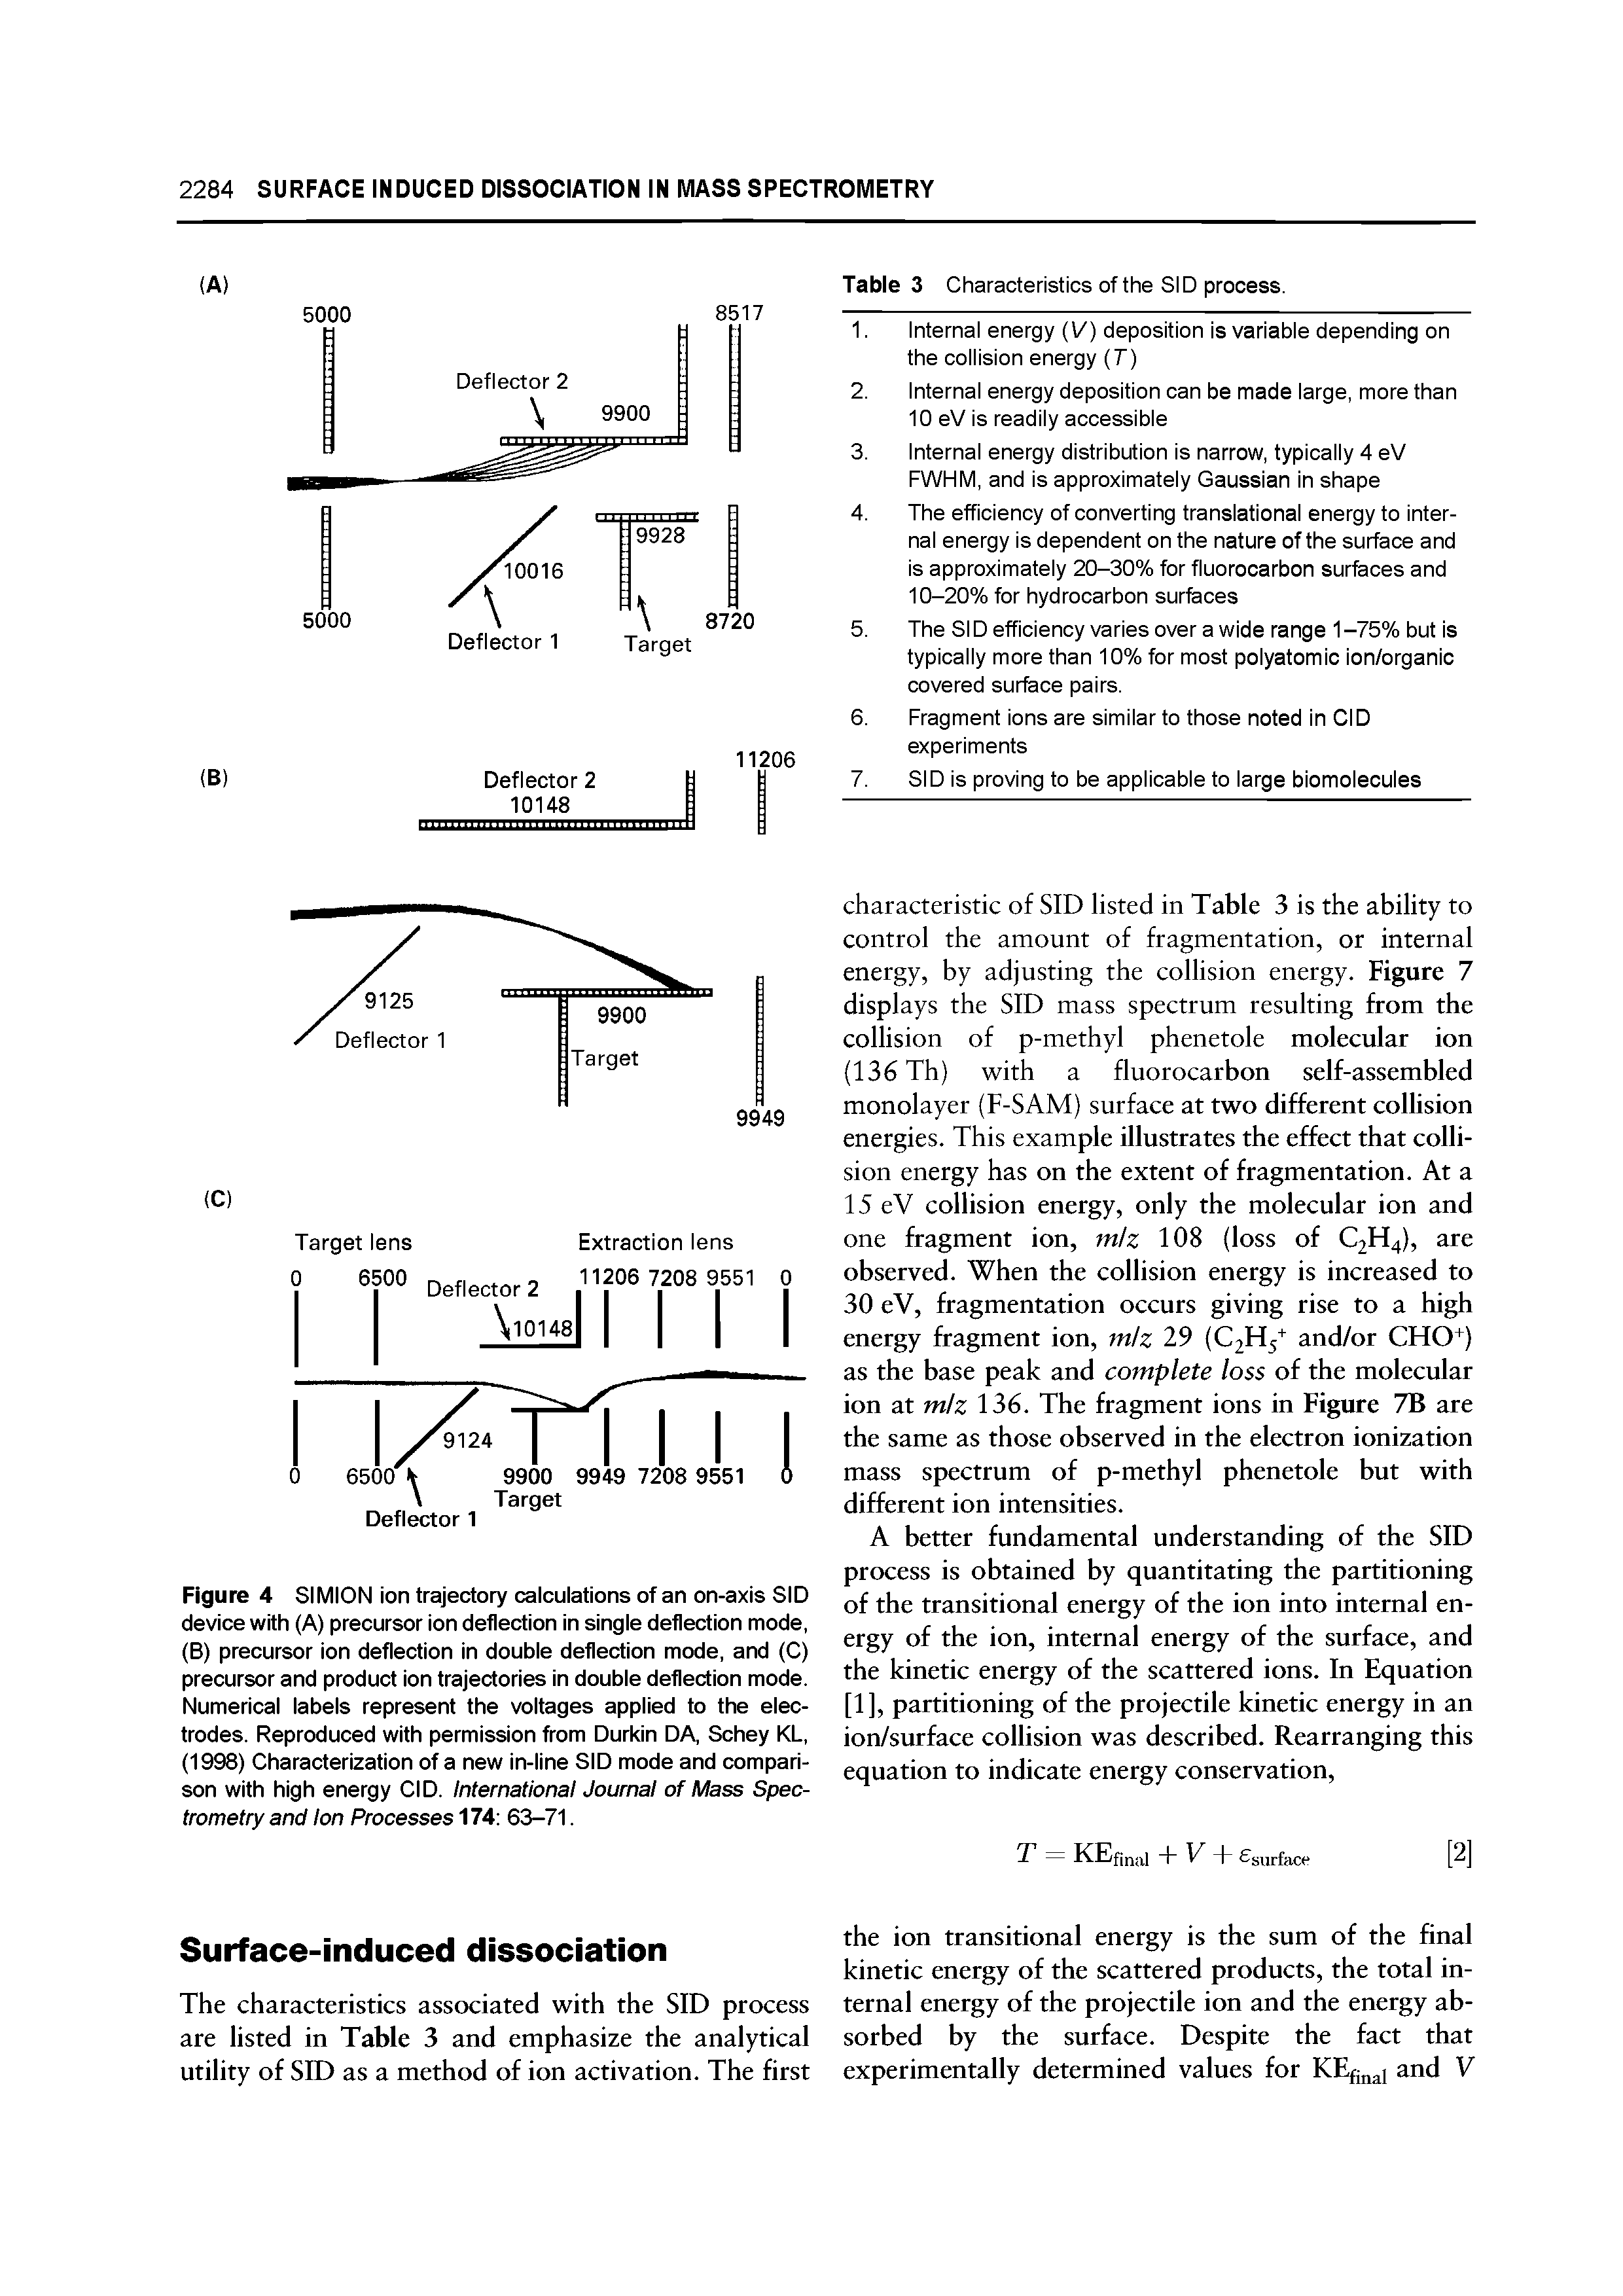 Figure 4 SIMION ion trajectory calculations of an on-axis SID device with (A) precursor ion deflection in single deflection mode, (B) precursor ion deflection in double deflection mode, and (C) precursor and product ion trajectories in double deflection mode. Numerical labels represent the voltages applied to the electrodes. Reproduced with permission from Durkin DA, Schey KL, (1998) Characterization of a new in-line SID mode and comparison with high energy CID. International Journal of Mass Spectrometry and Ion Processes 174 63-71.